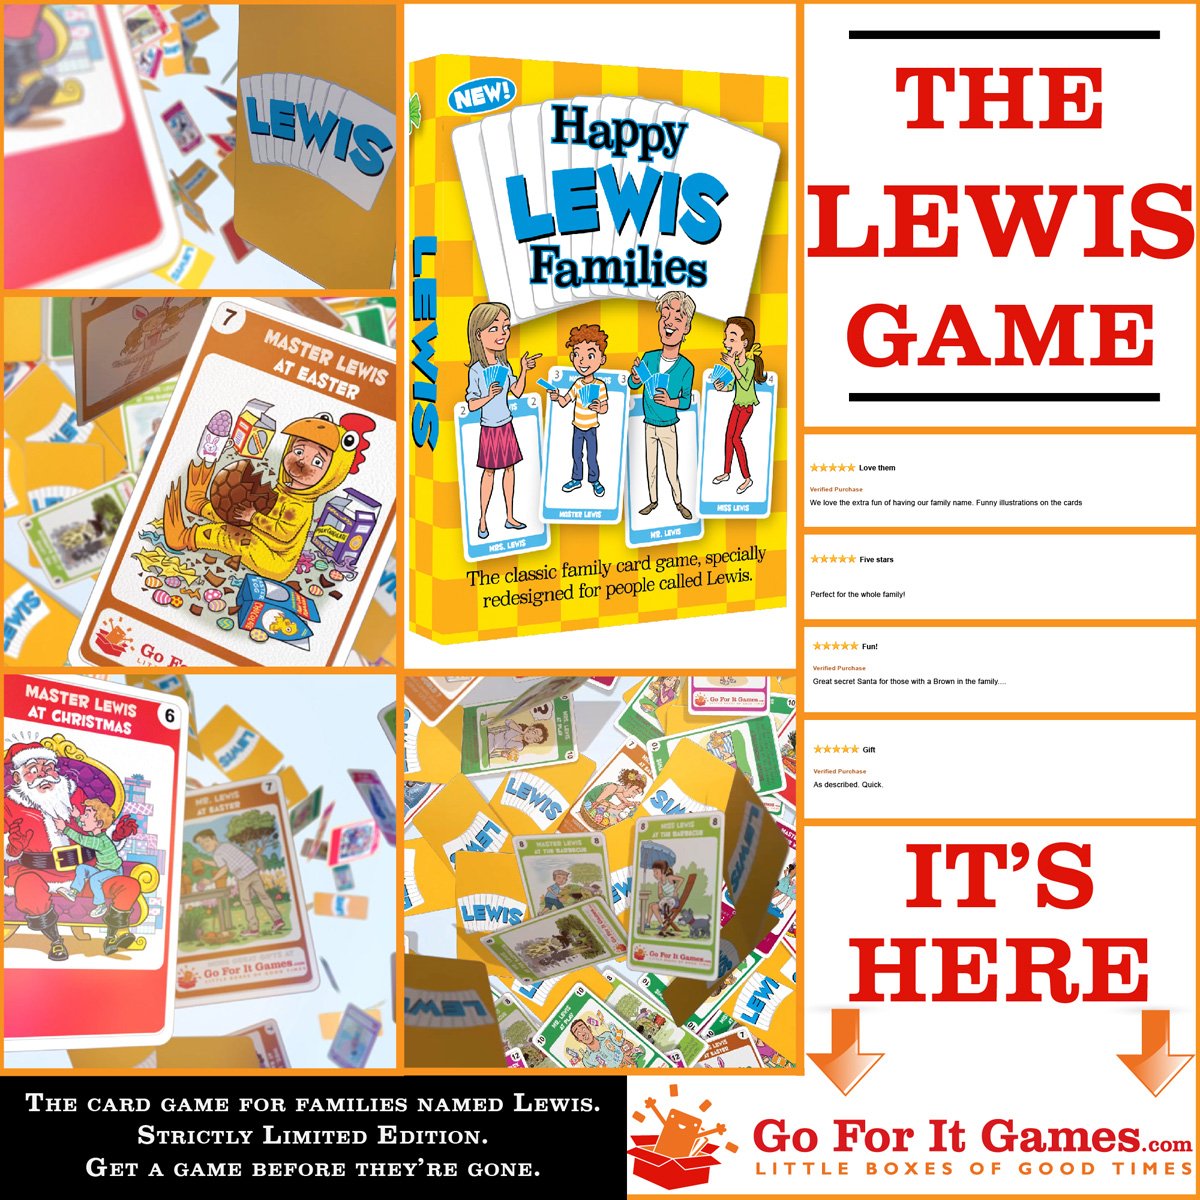 Card game fun, created especially for people whose last name is Lewis! Find it at ow.ly/45x230oxb48 #LewisFamily #LewisFam #FamilyLewis #LewisBoys #DeclanLewis #LewisGirls #LewisKids #MrLewis #MrsLewis #LewisCrew #people whose last name is Lewisquad